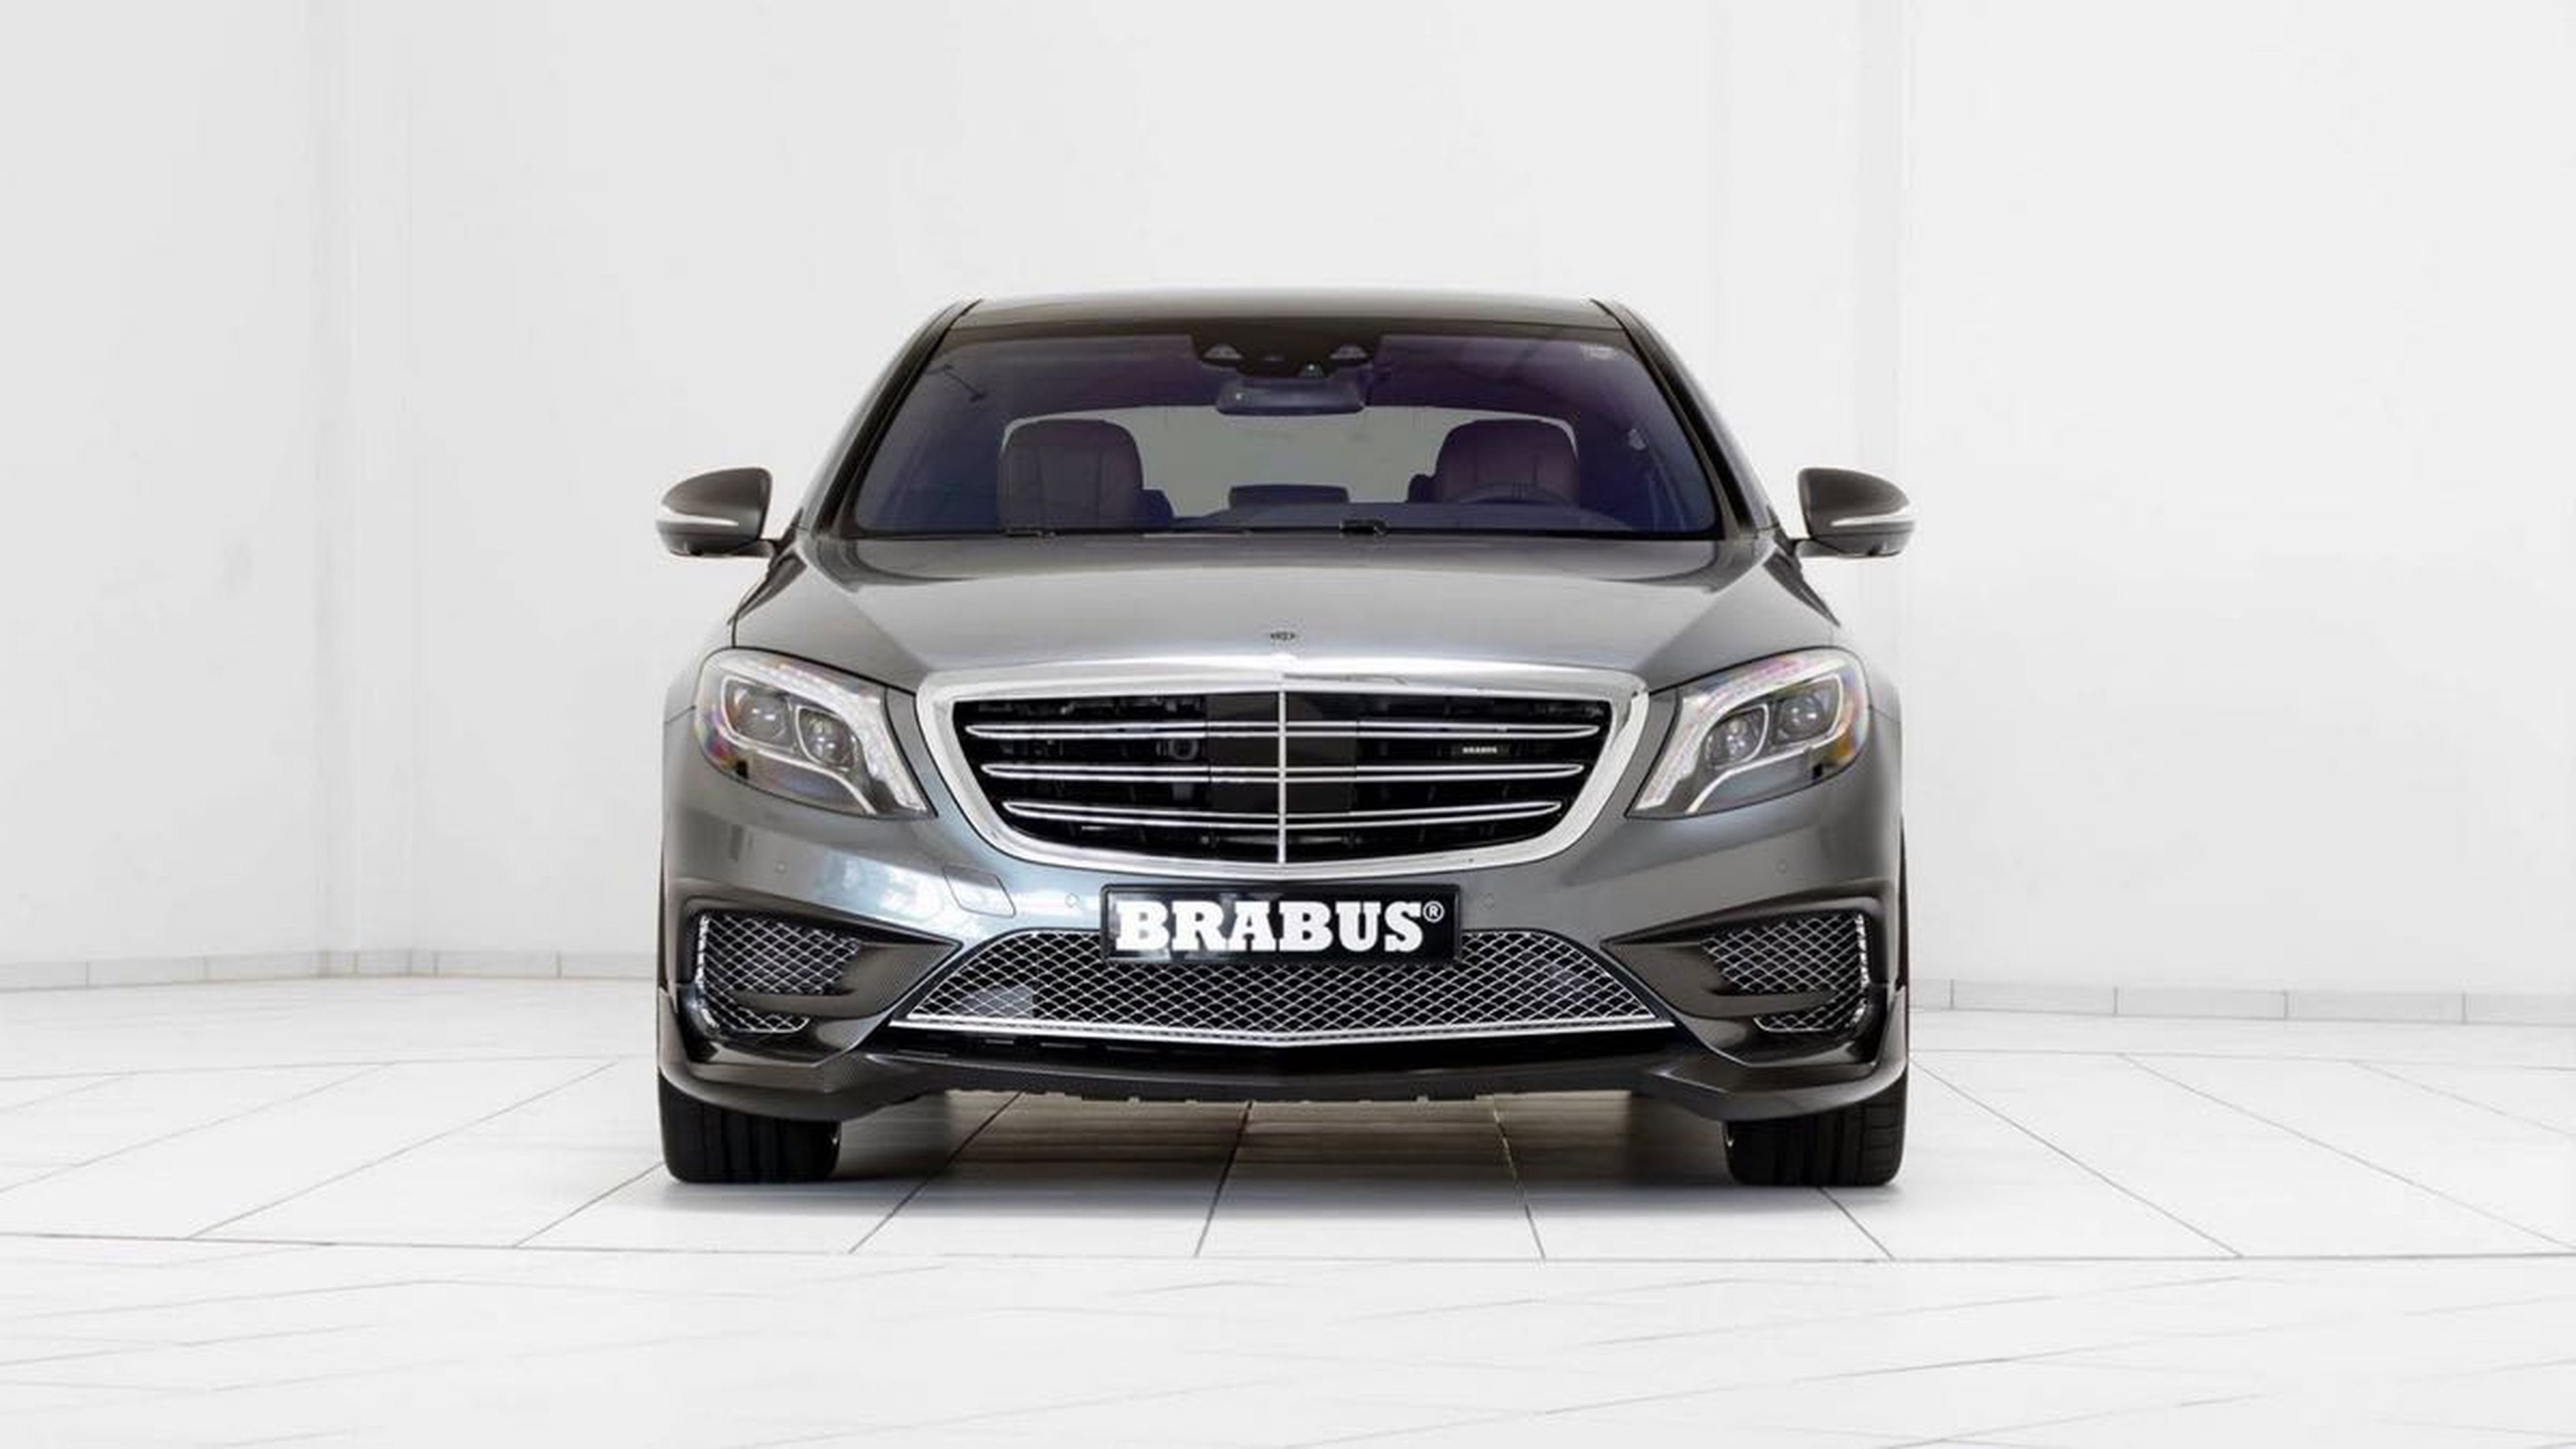 Mercedes Clase S Brabus 900 frontal